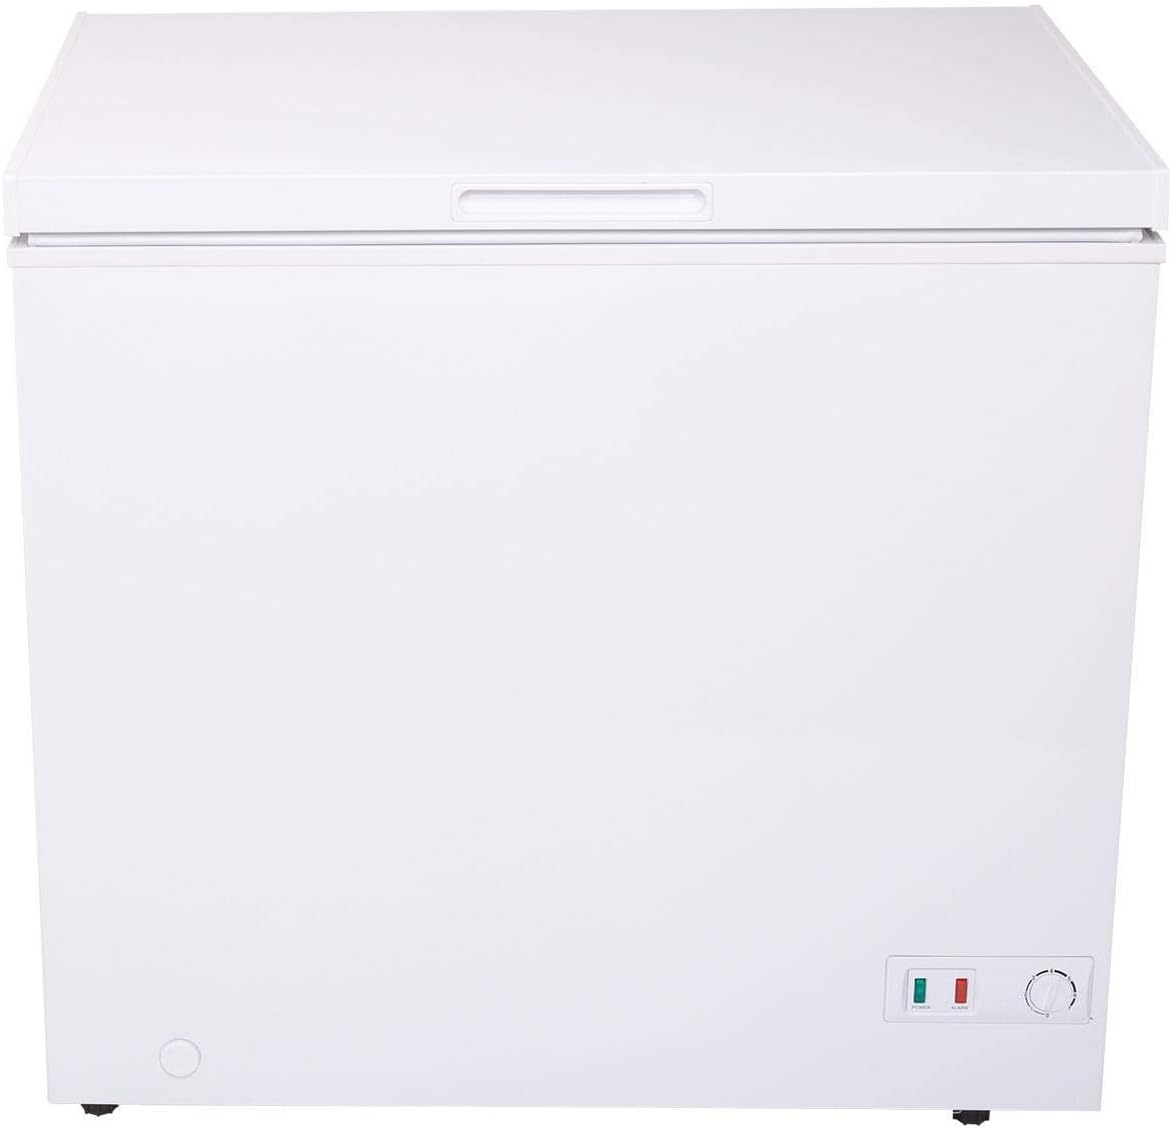 SIA CHF200WH 90cm Freestanding 201L White Chest Freezer - Amazing Gadgets Outlet